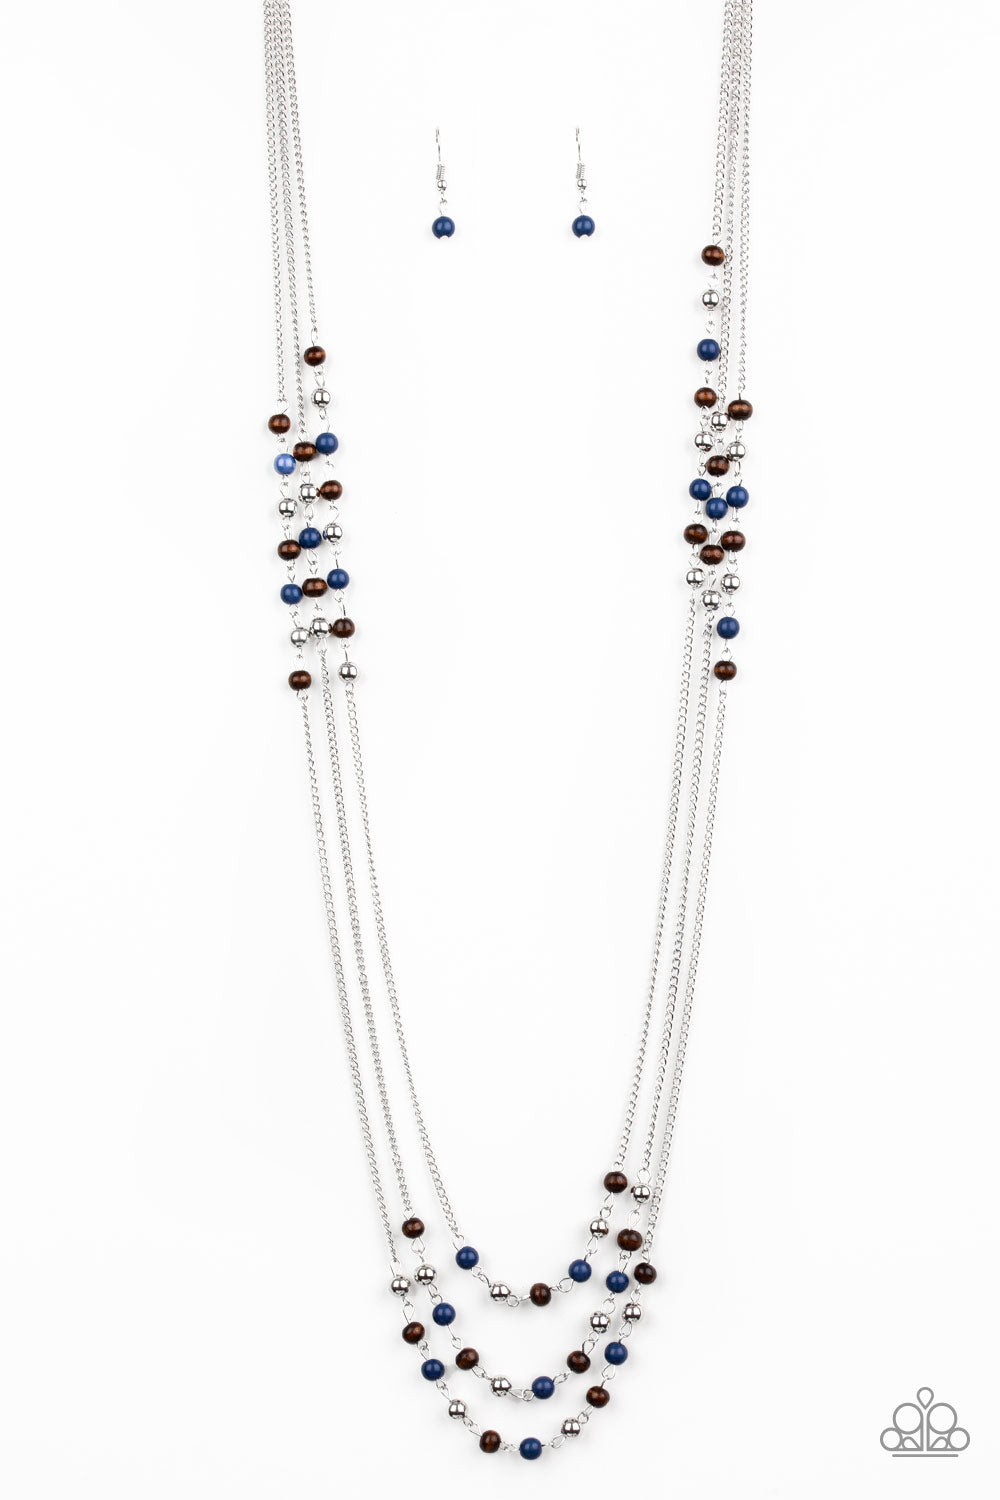 Dainty silver, blue, and wooden beads trickle along three shimmery silver chains, creating colorful layers across the chest. Features an adjustable clasp closure.  Sold as one individual necklace. Includes one pair of matching earrings.